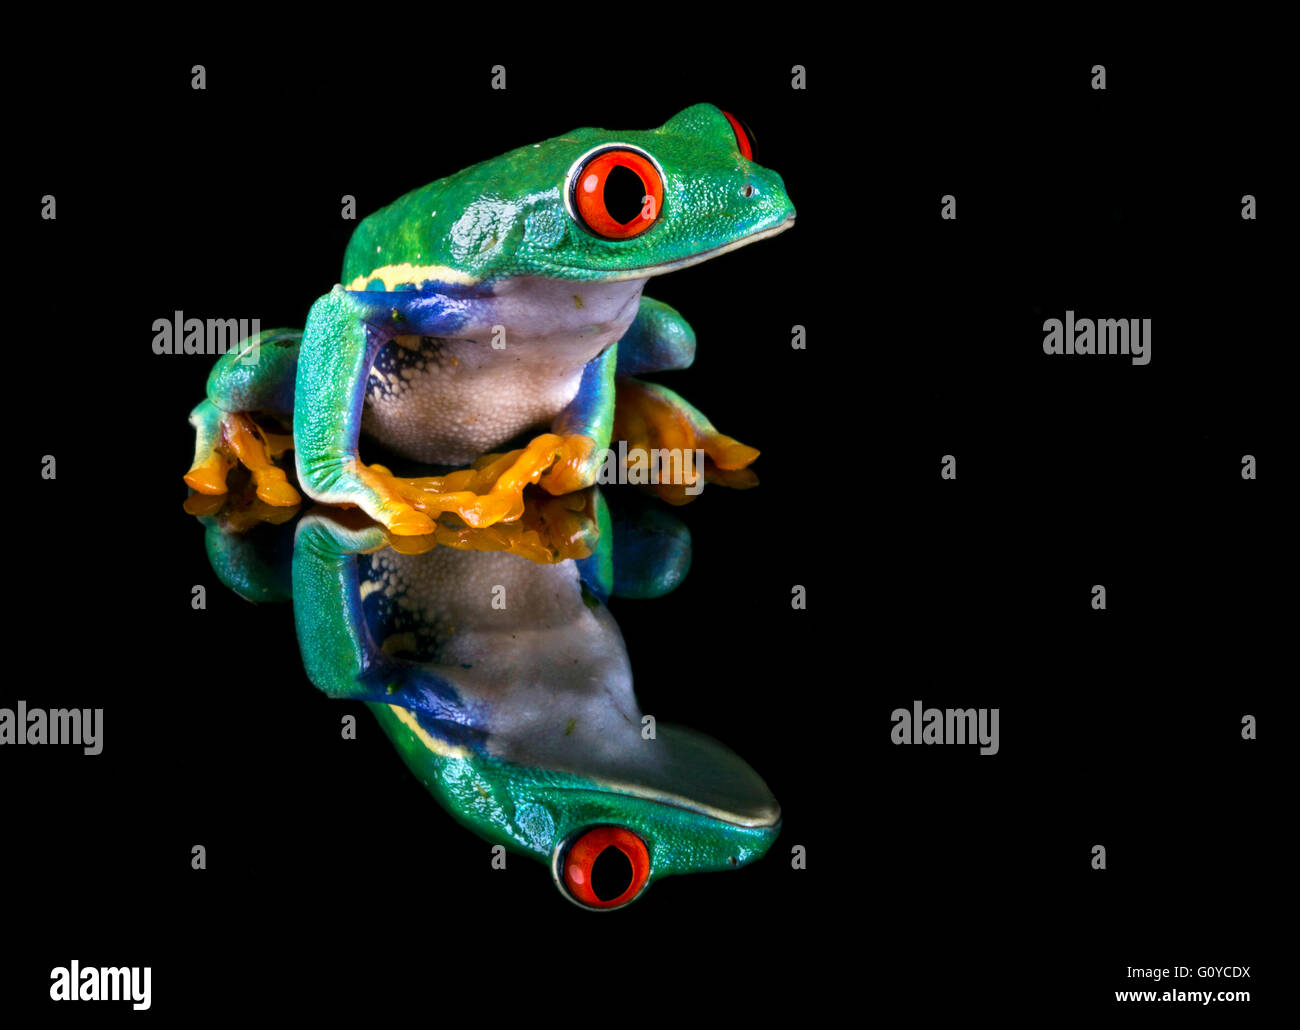 Red-eyed tree frog Stock Photo